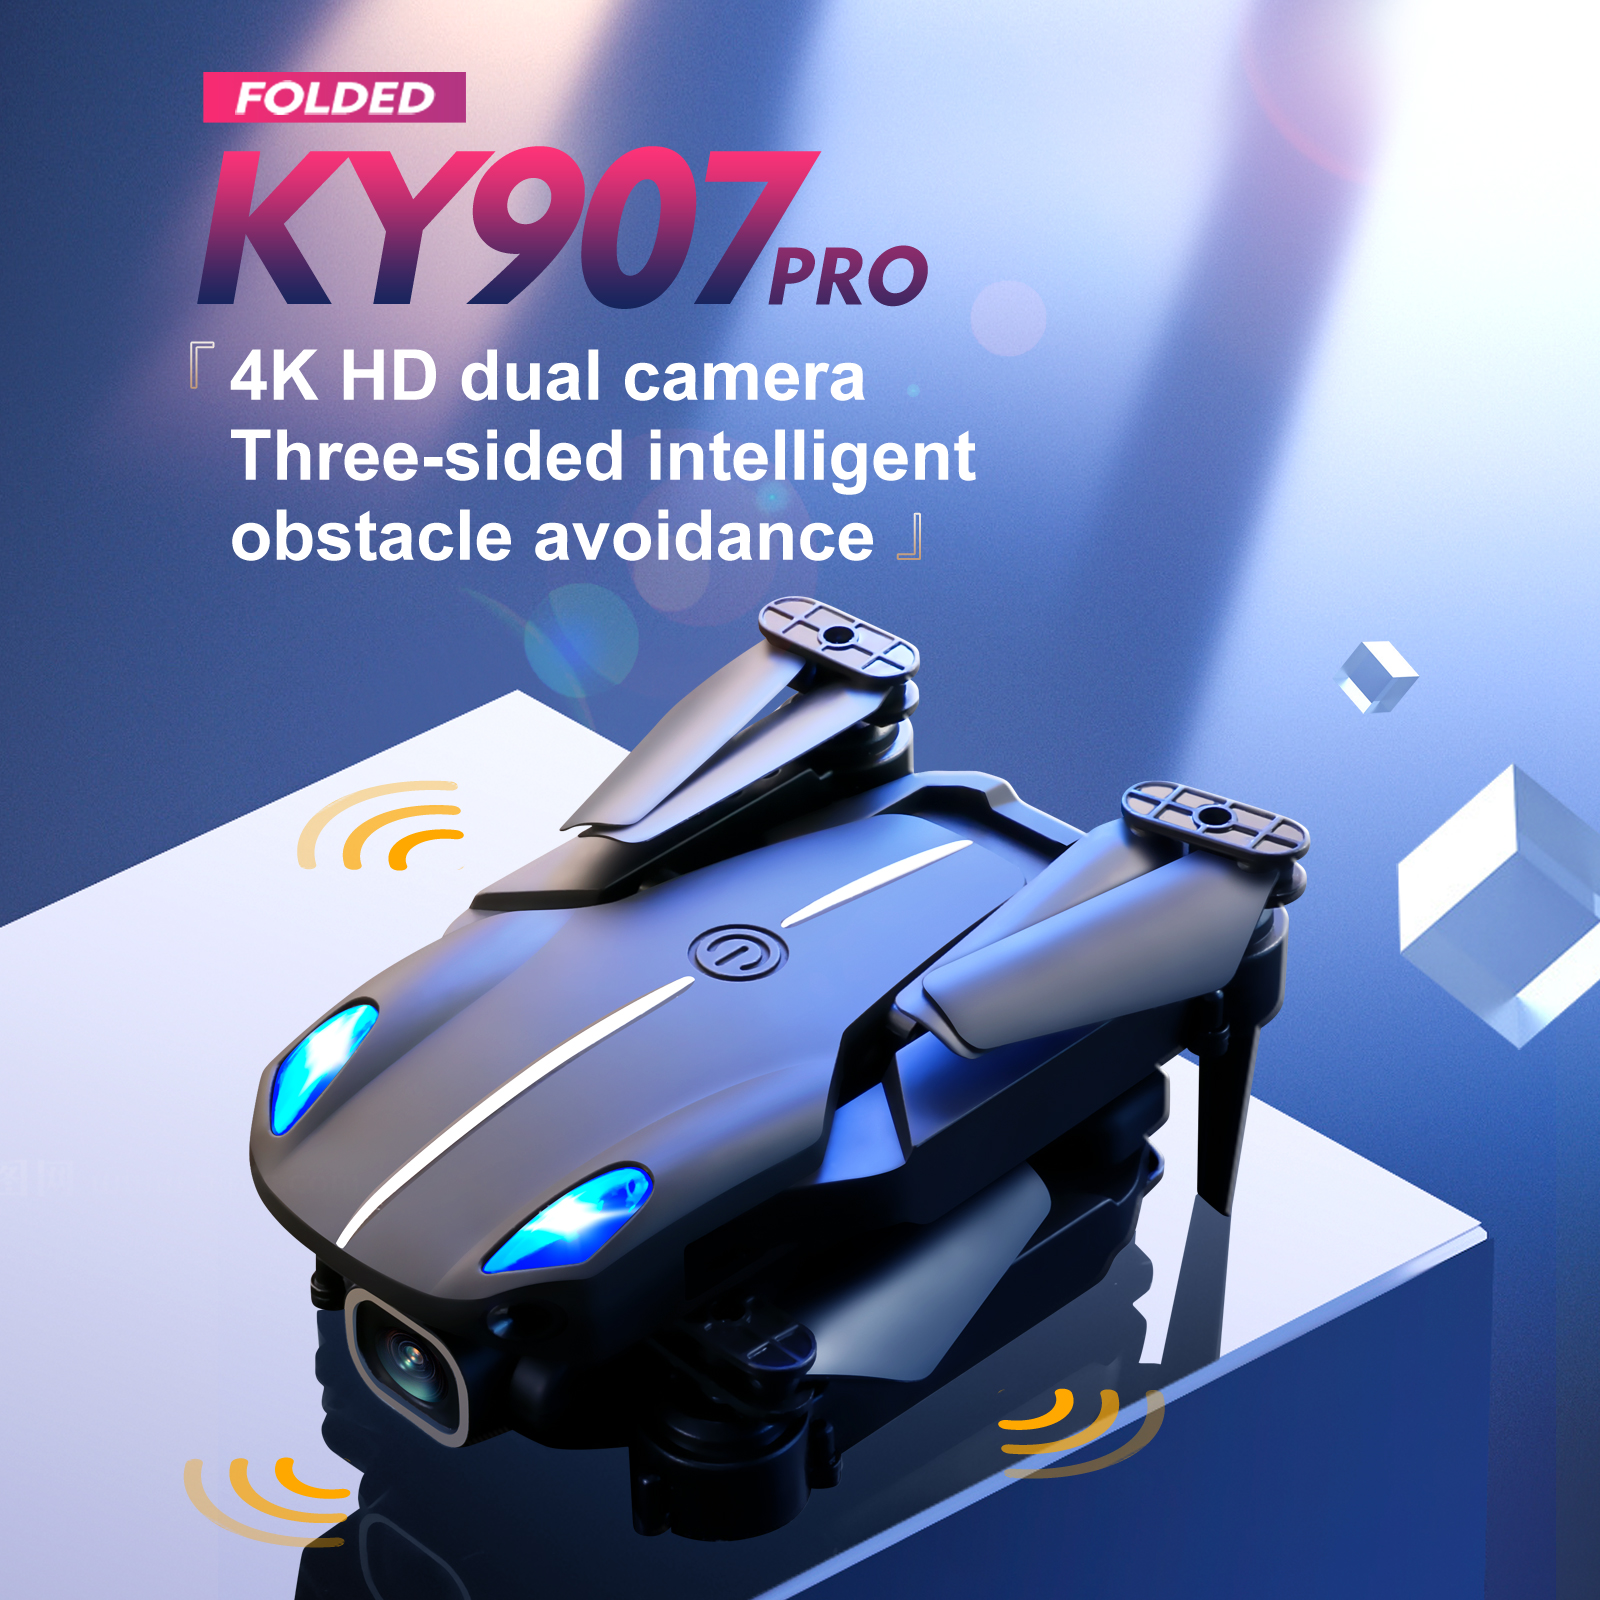 KY907-PRO-Mini-Wifi-FPV-with-4K-HD-Camera-Three-side-Obstacle-Avoidance-Headless-Mode-RC-Drone-Quadc-1906185-1